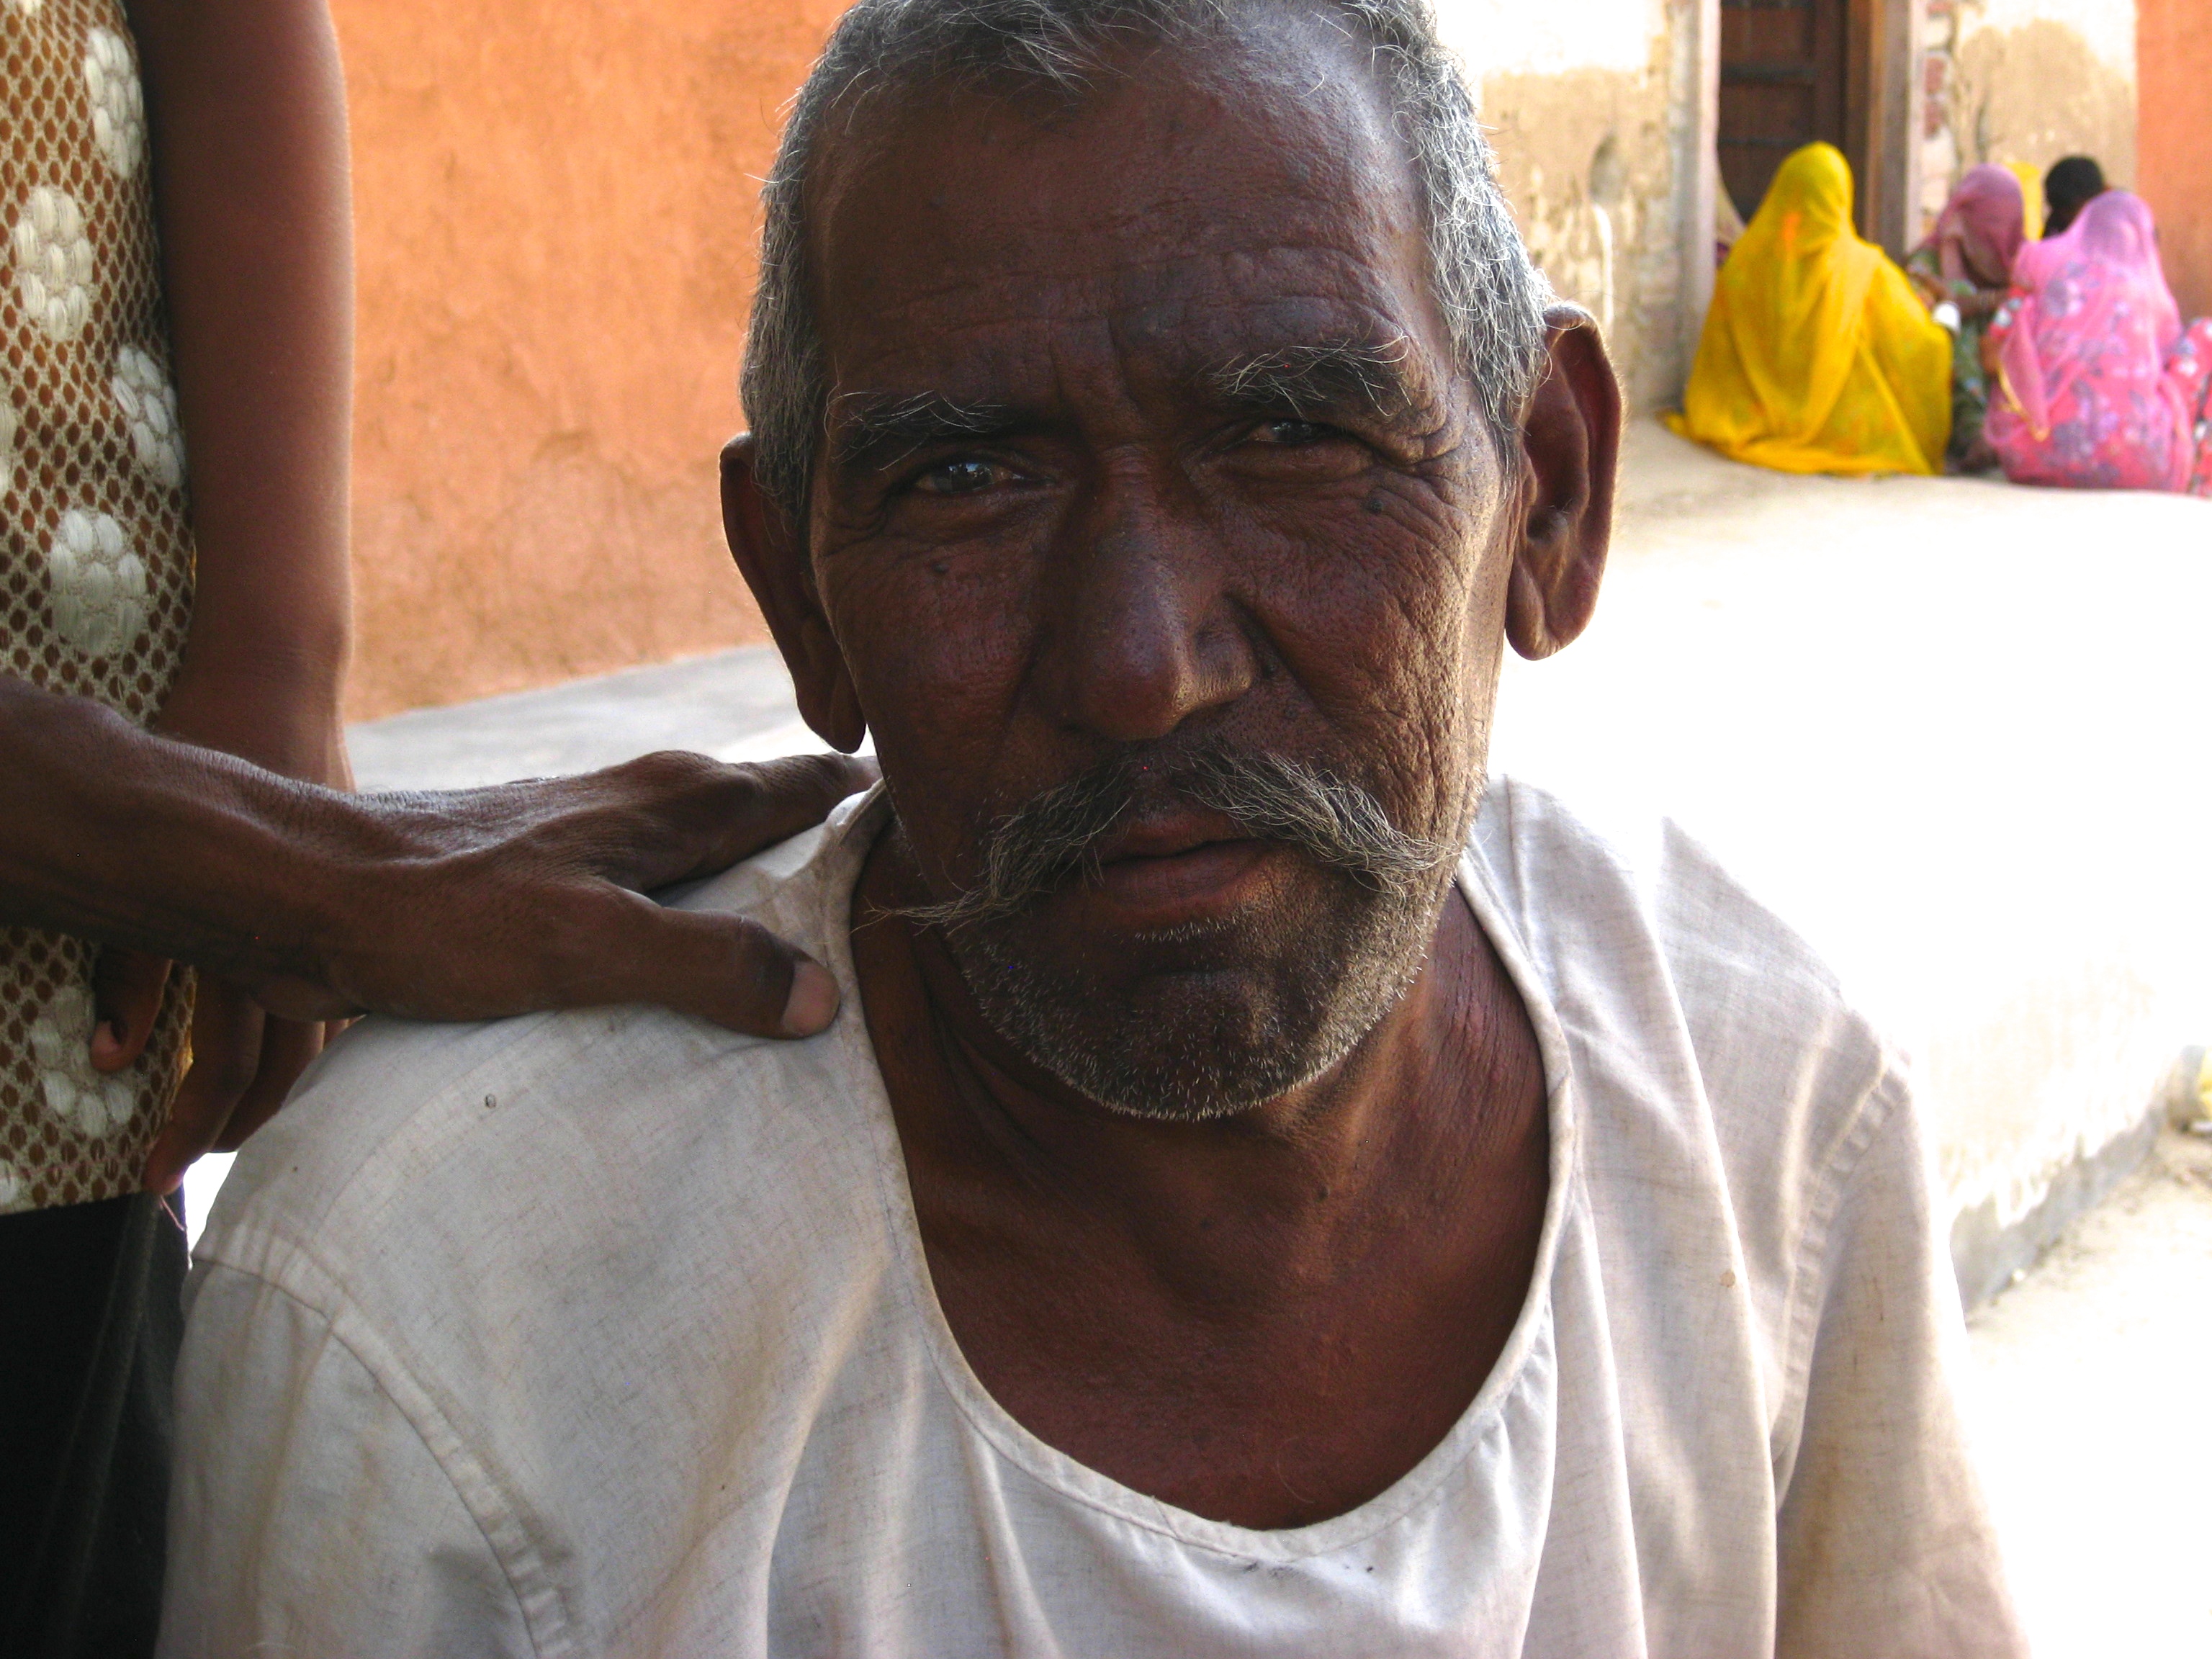 Another view of older man